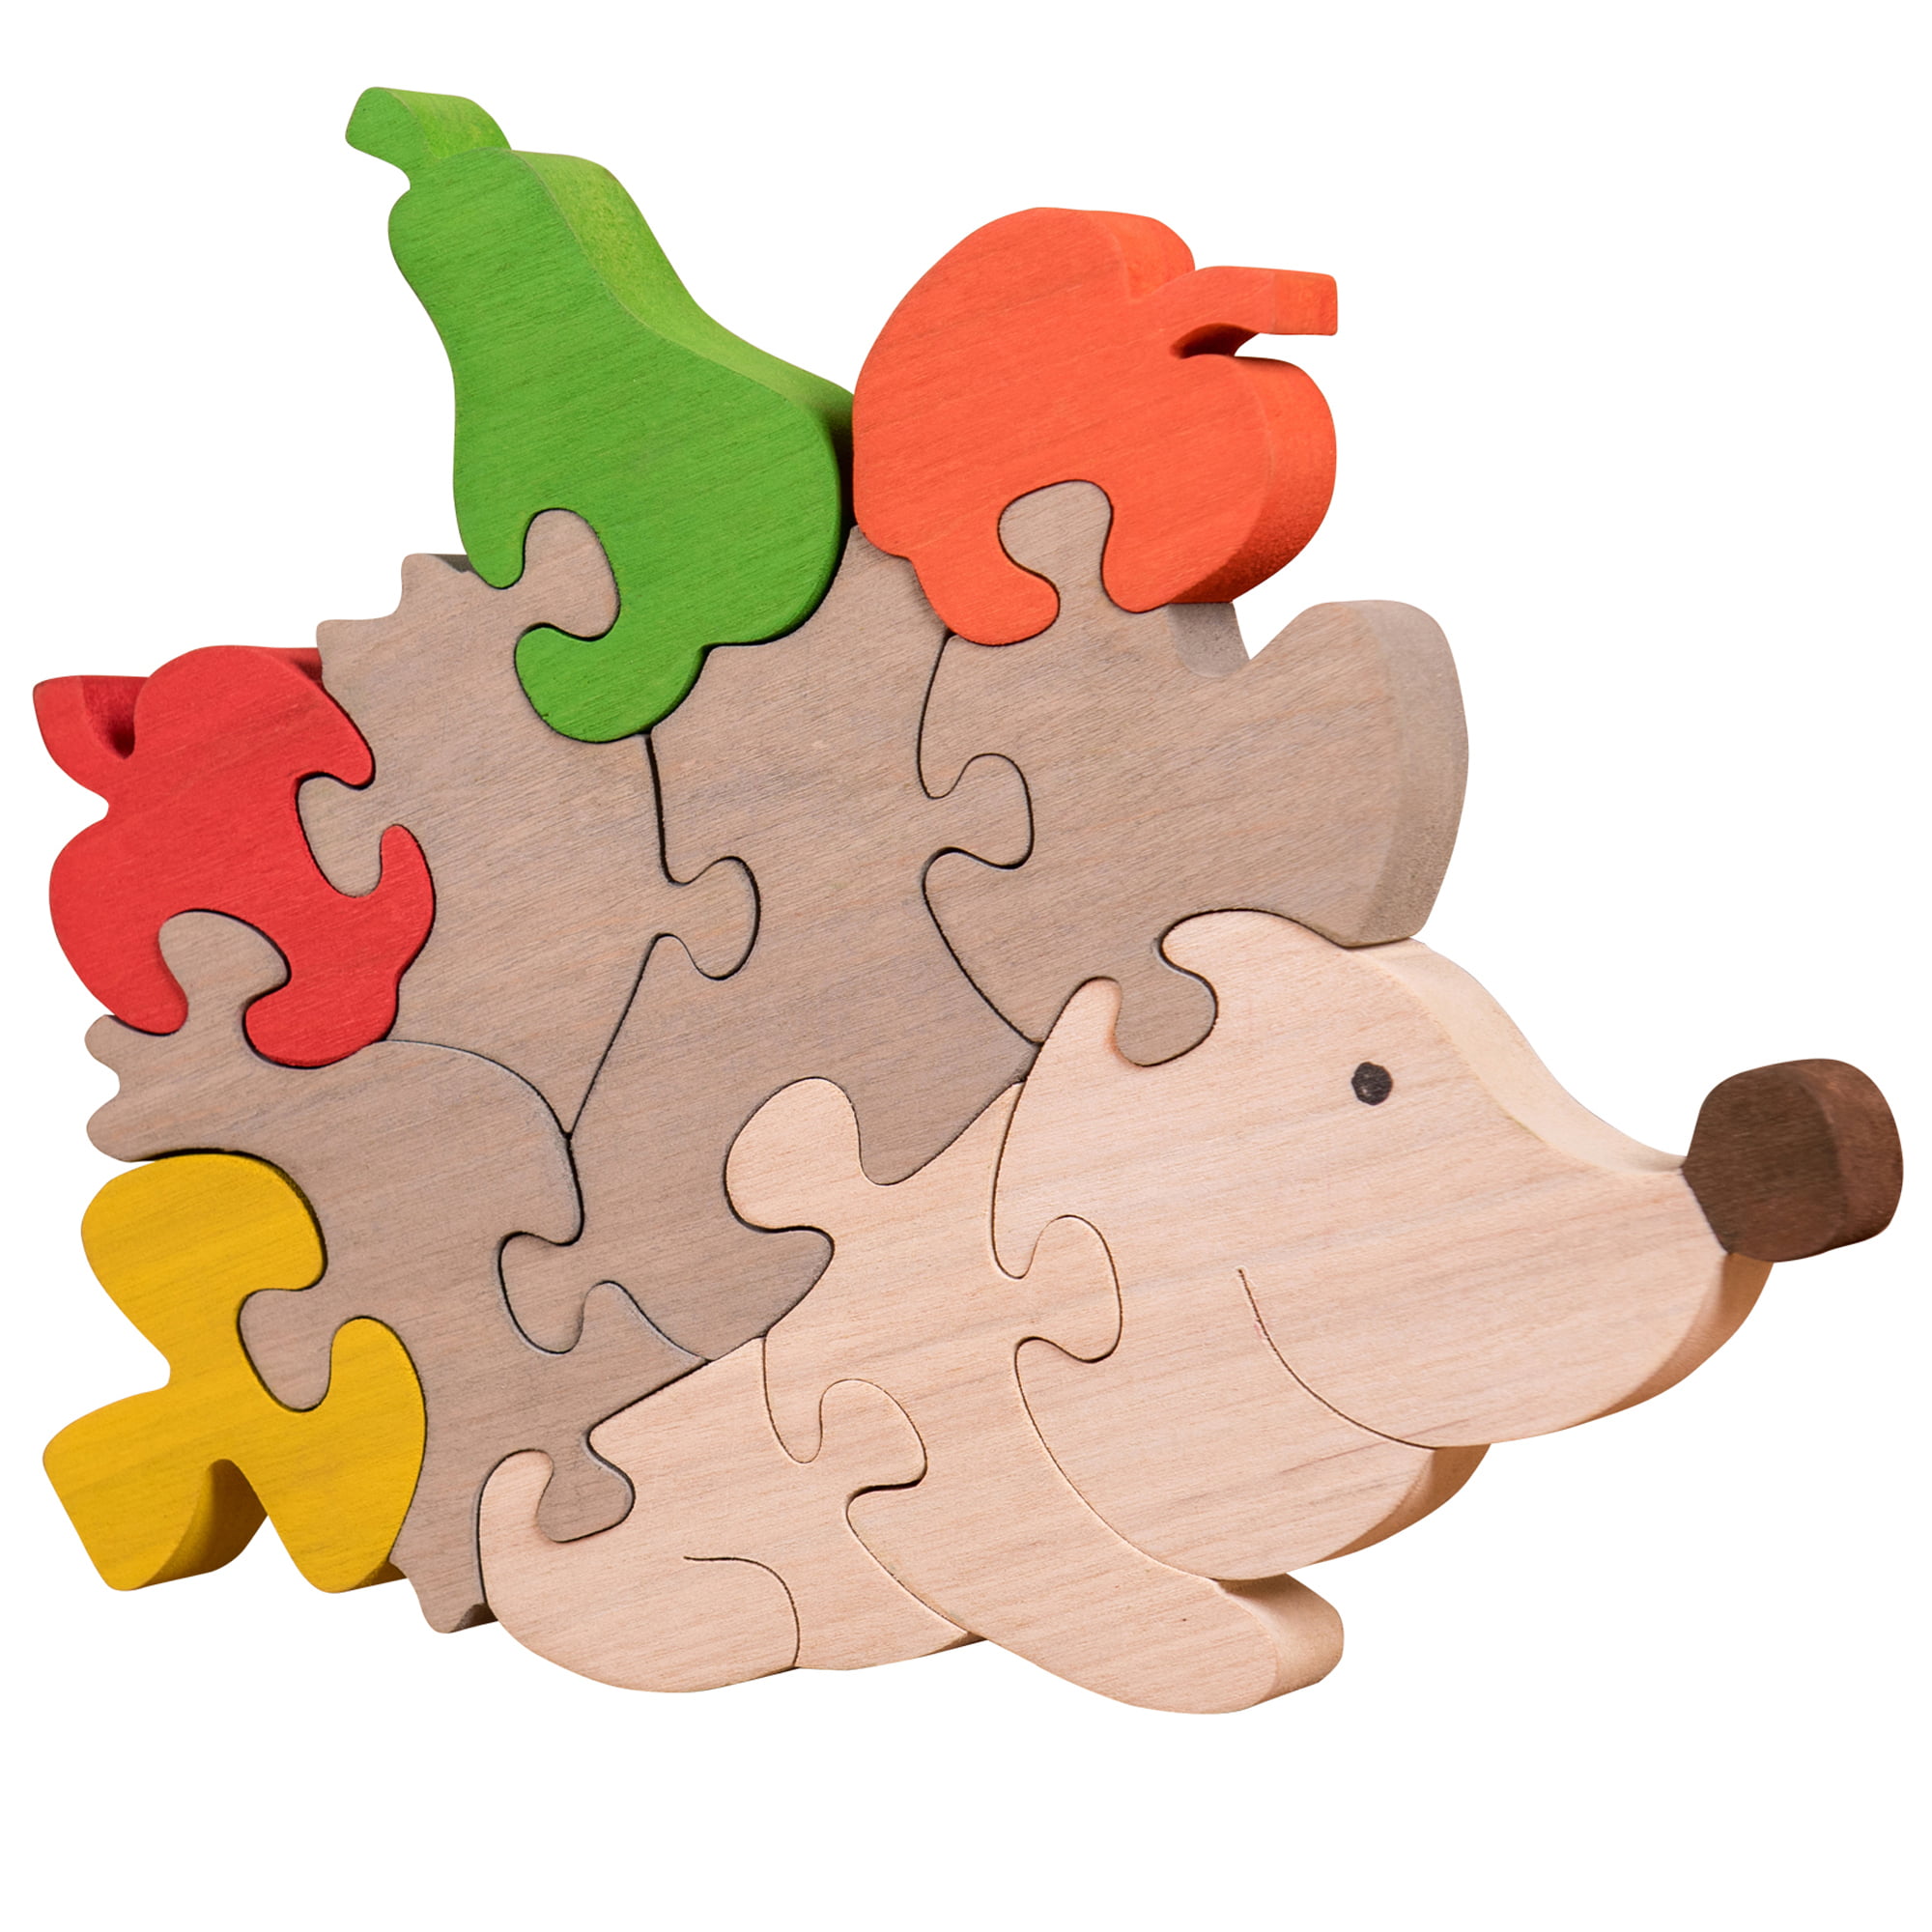 puzzles for toddlers walmart